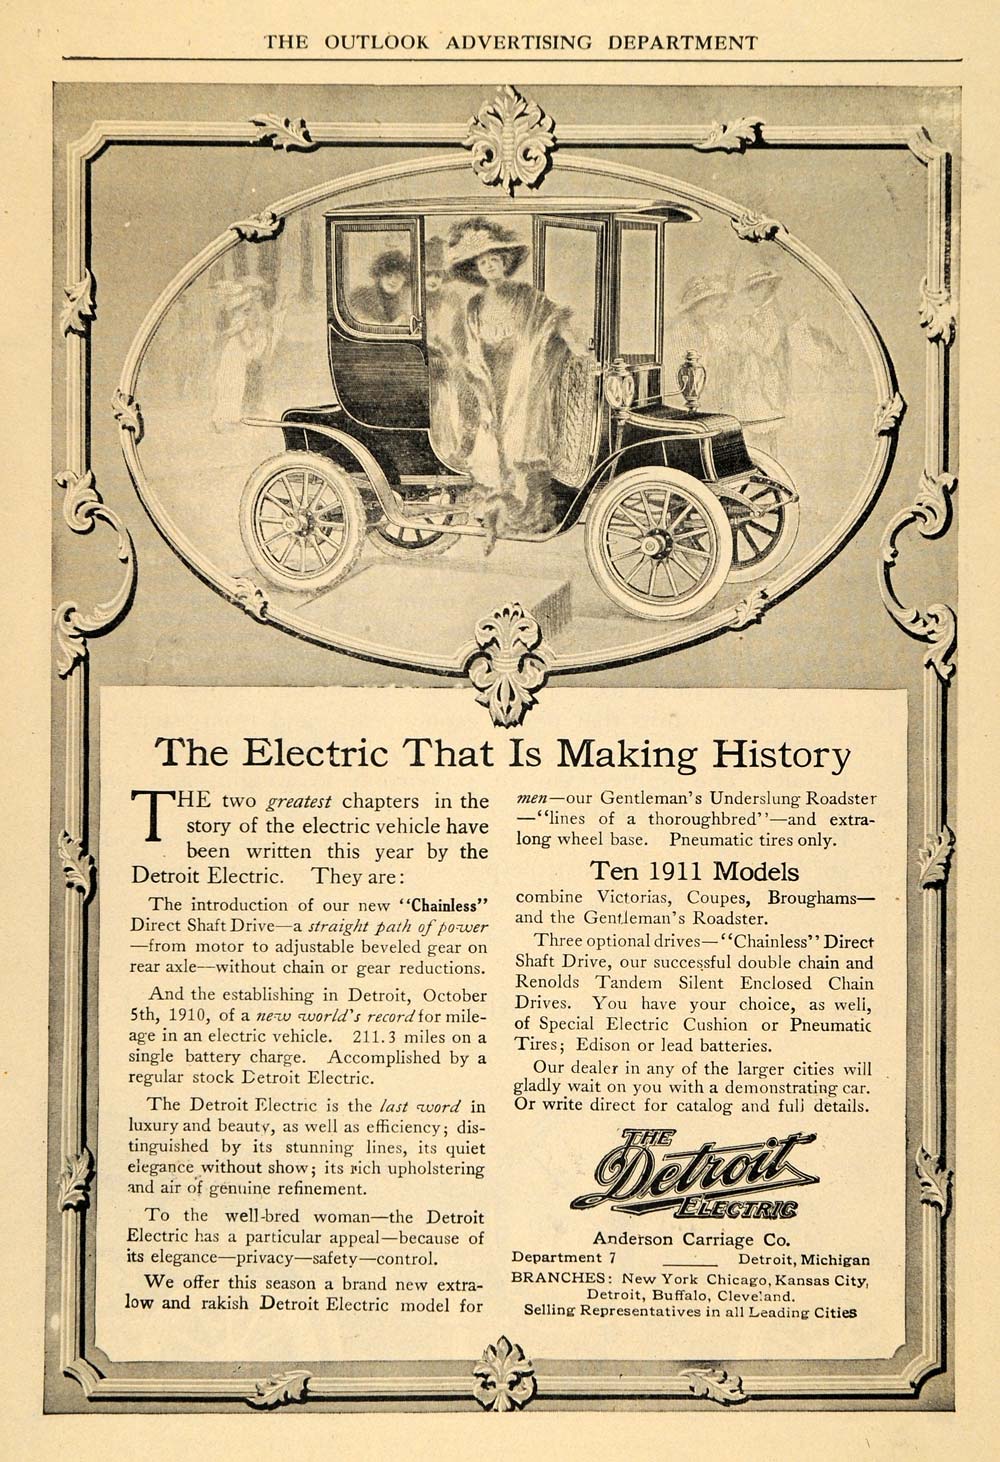 1910 Ad Chainless Shaft Drive Detroit Electric Cars - ORIGINAL ADVERTISING TOM1